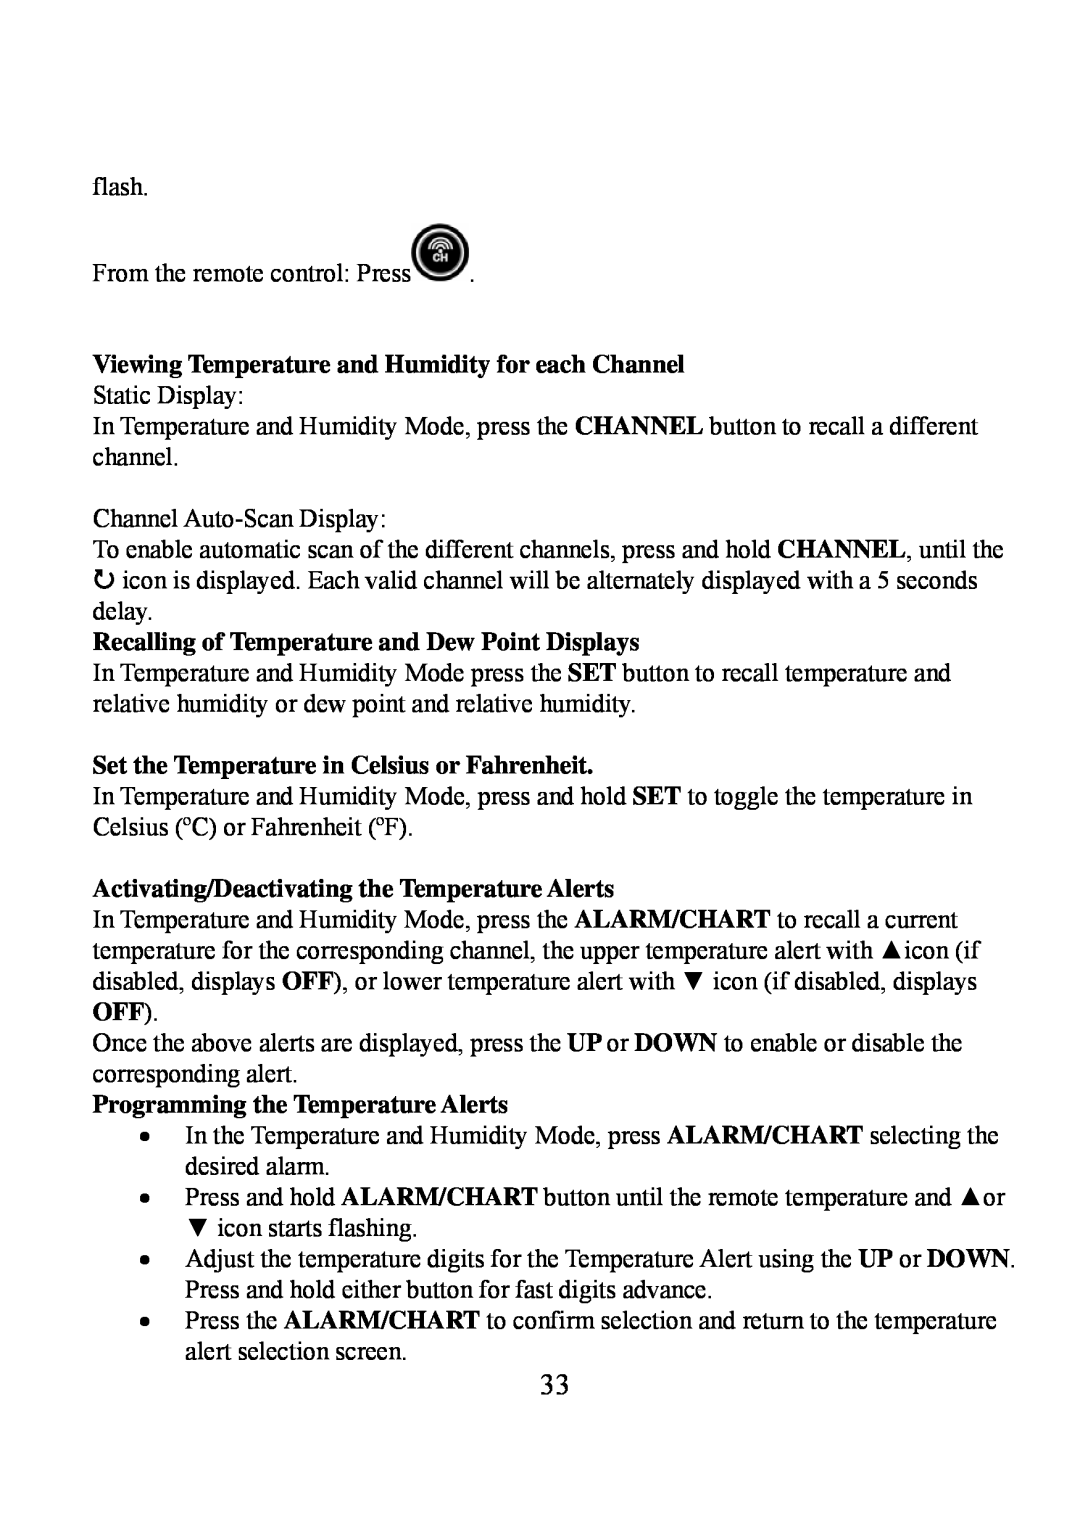 Honeywell TE923W Viewing Temperature and Humidity for each Channel, Recalling of Temperature and Dew Point Displays 